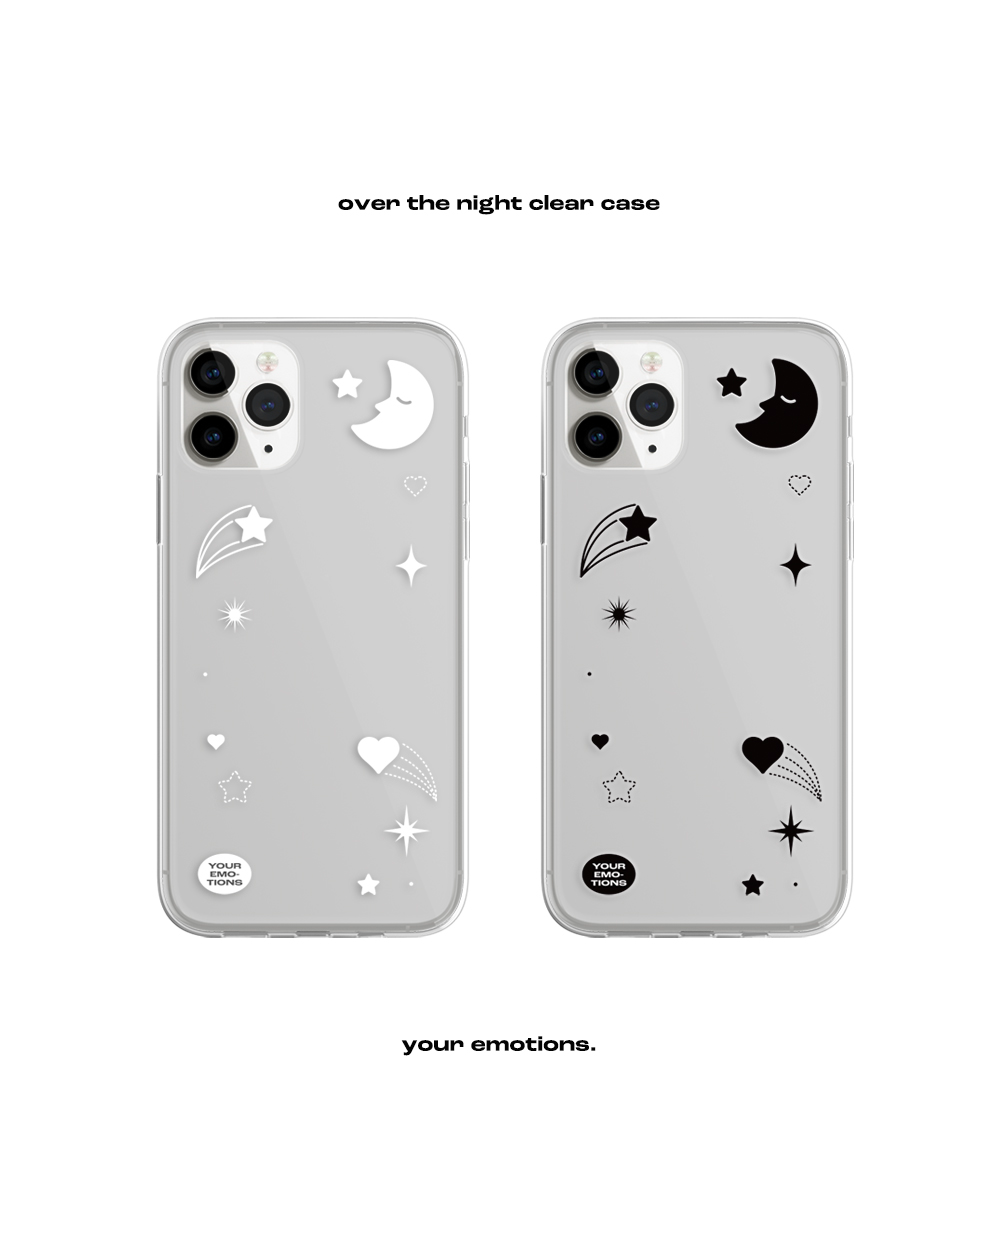 over the night glossy clear case